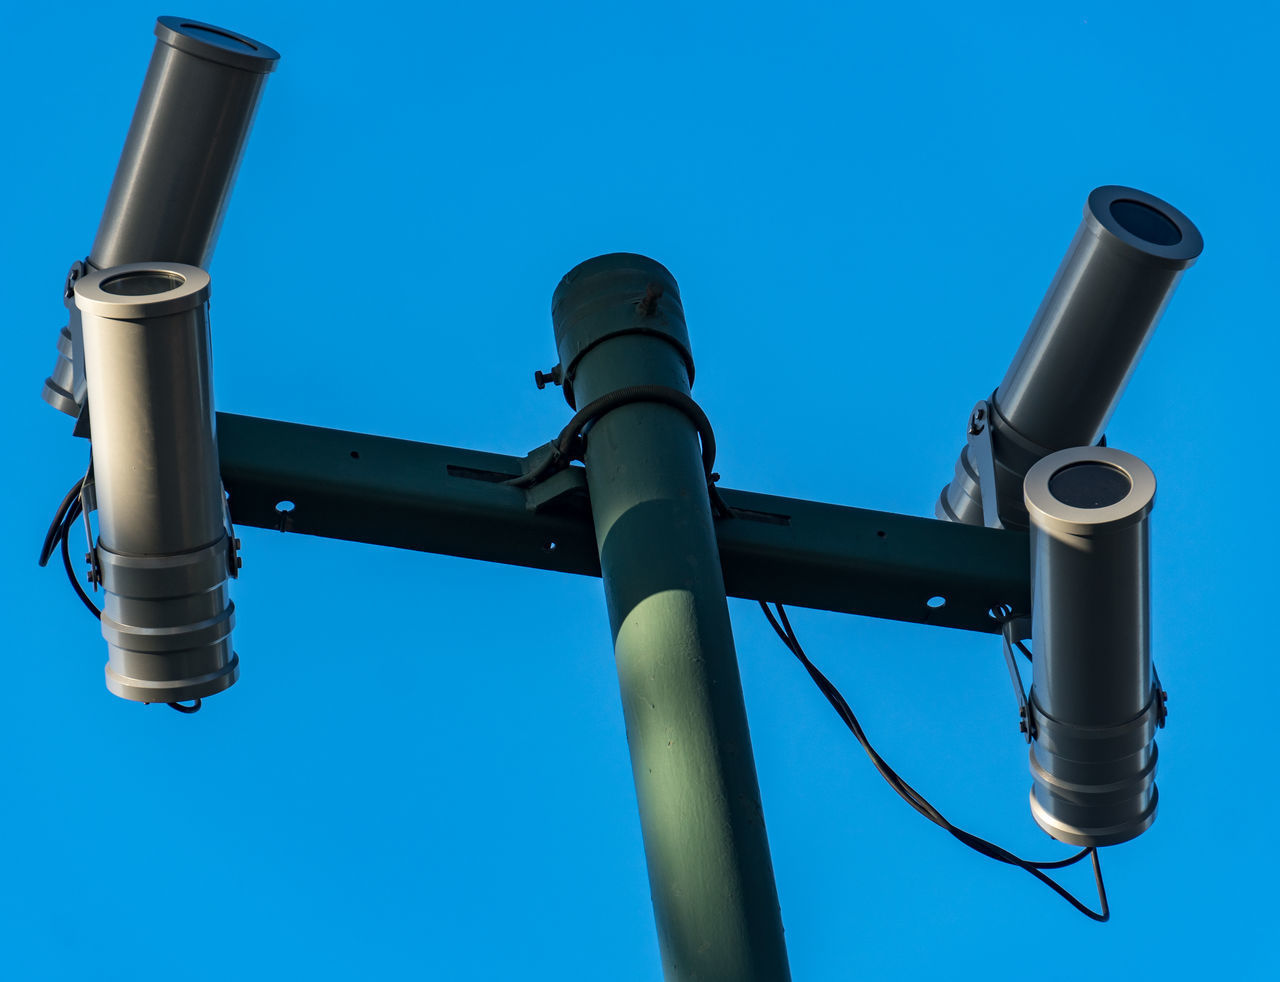 LOW ANGLE VIEW OF ELECTRIC LAMP AGAINST BLUE SKY